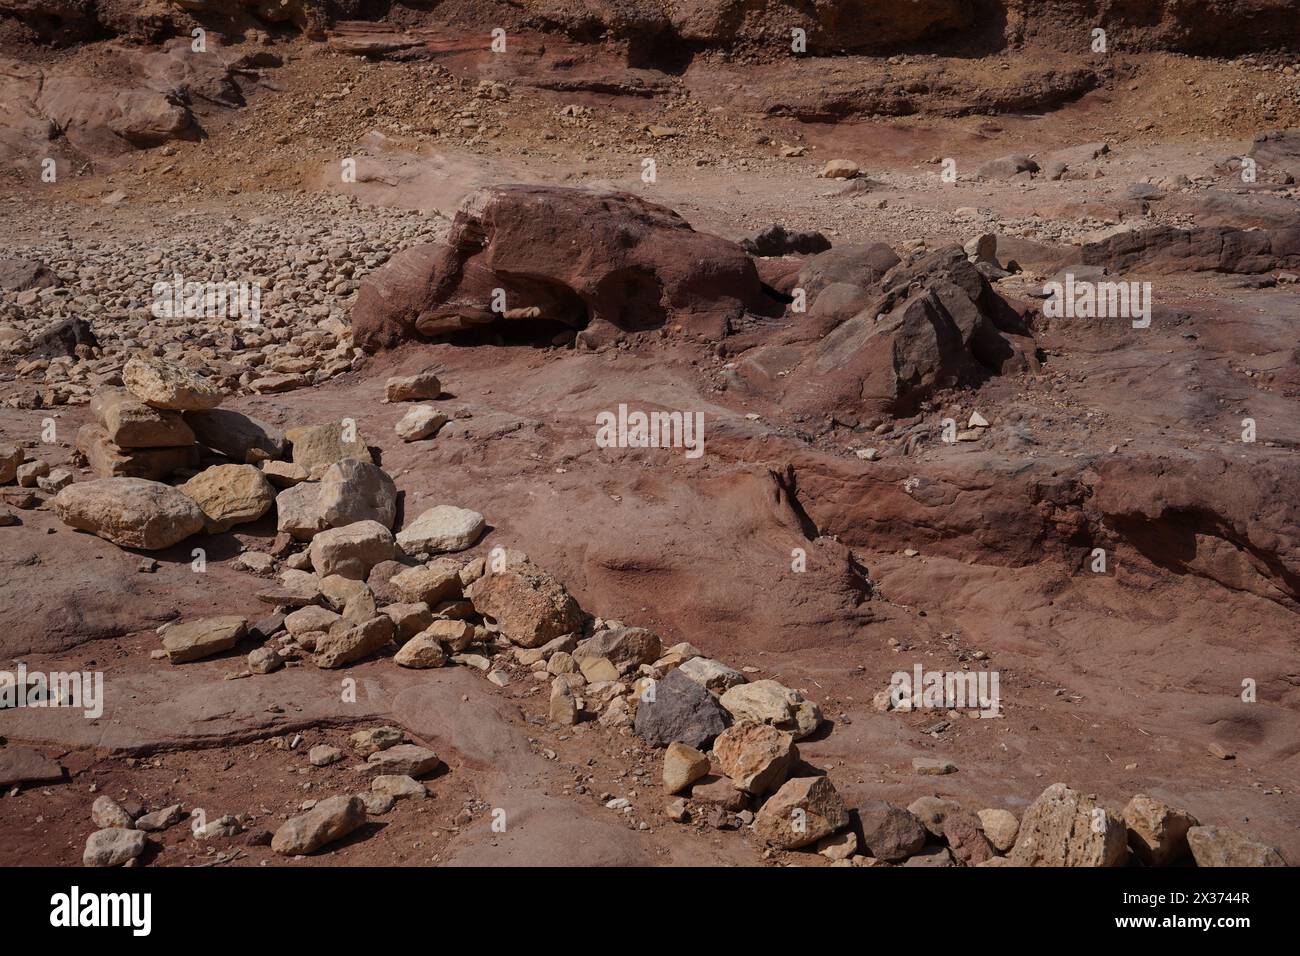 Closeup of rocks in Red Canyon, Geological nature park, near Eilat, Israel Stock Photo